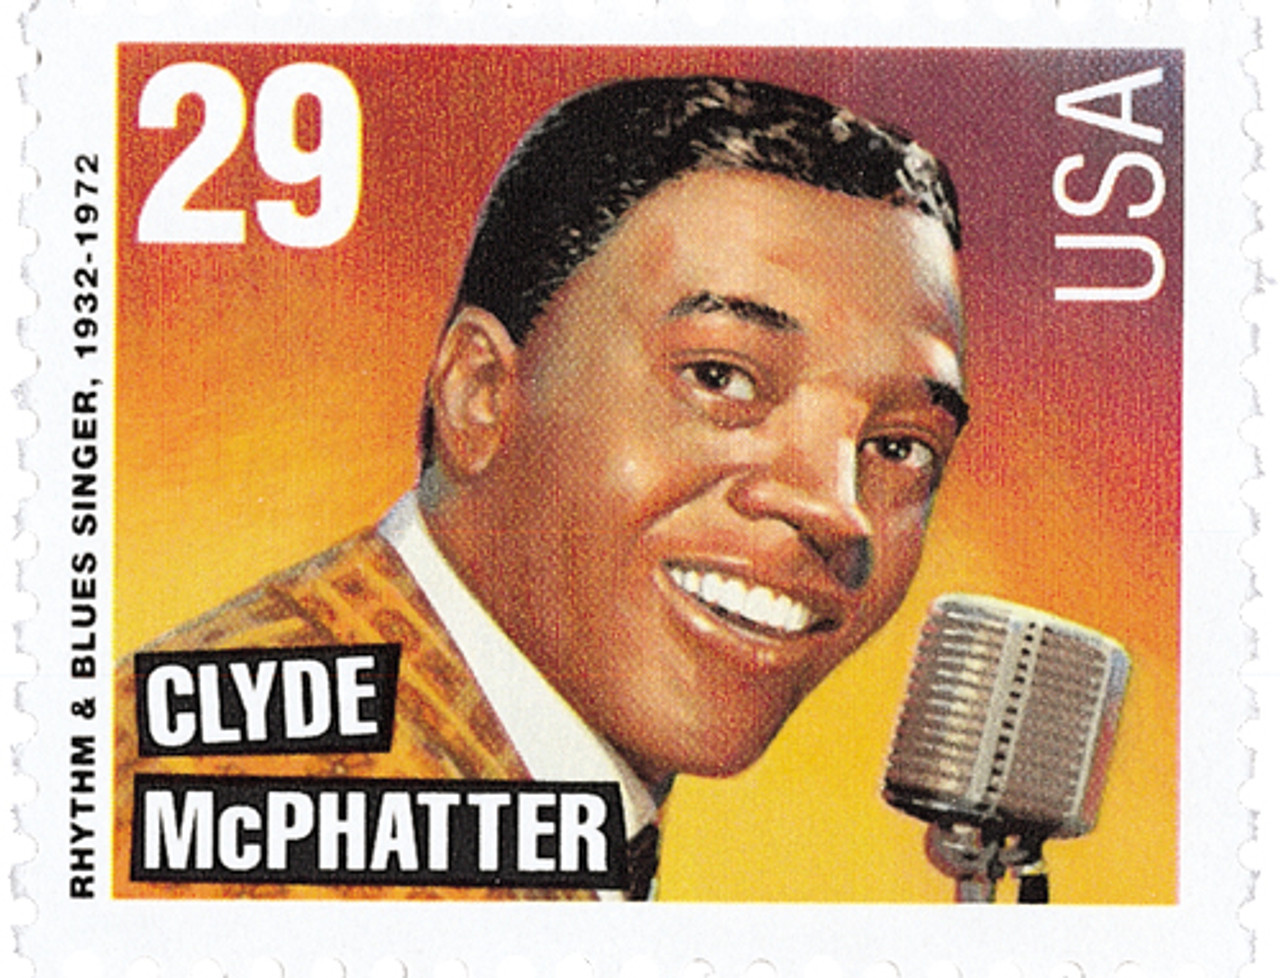 2726 - 1993 29c Legends of American Music: Clyde McPhatter